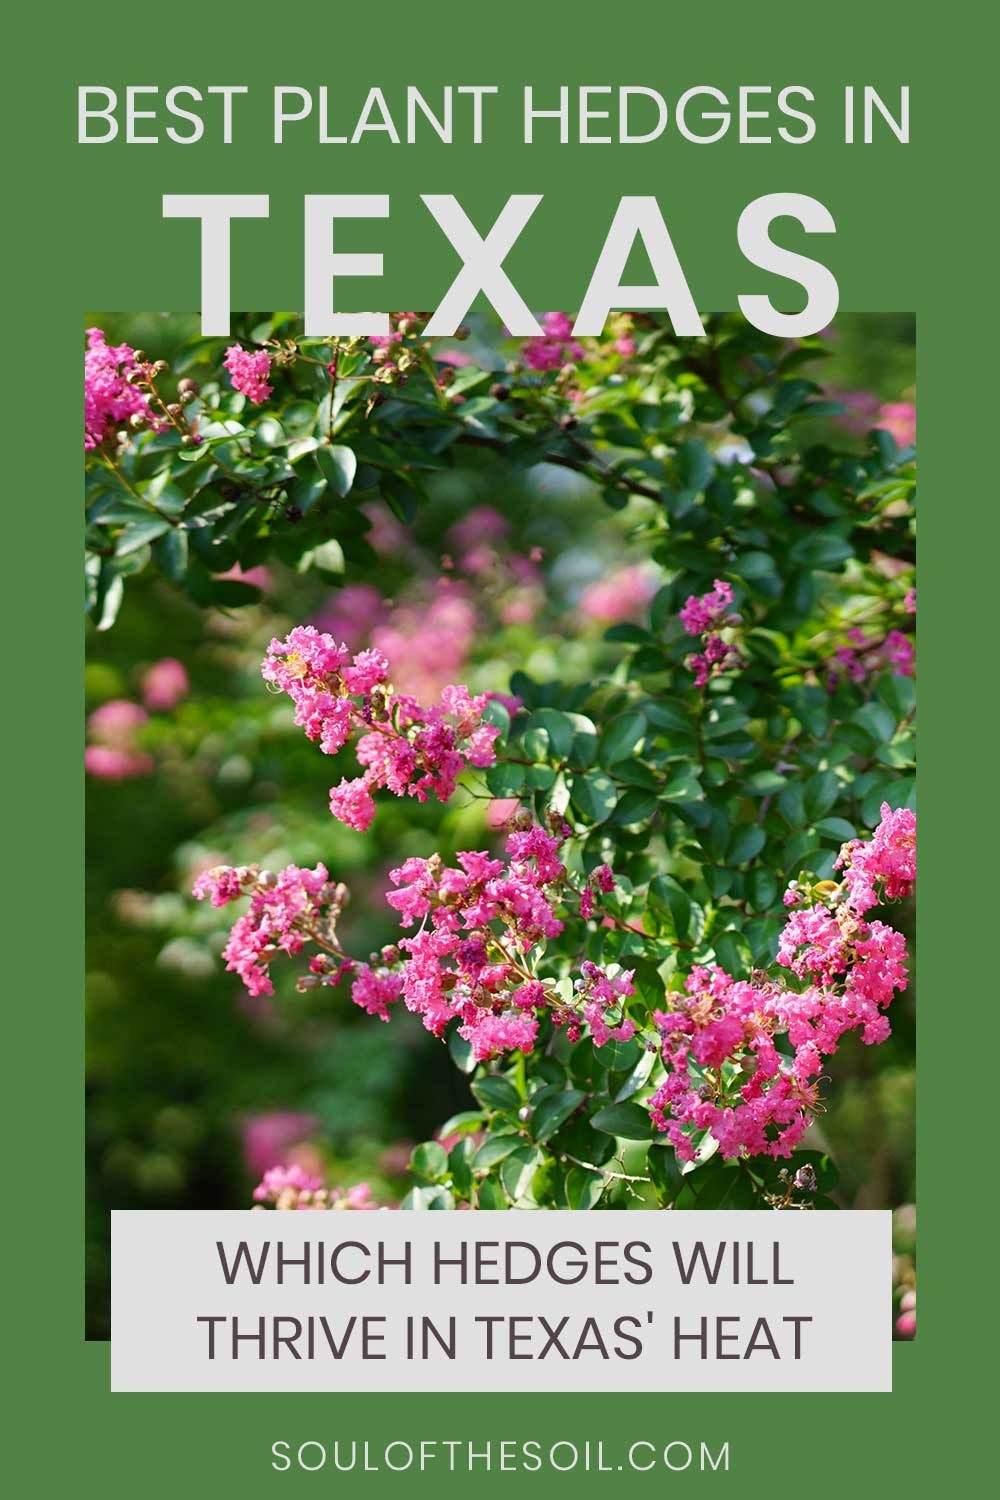 Best Plant Hedges In Texas – Which Hedges Will Thrive in Texas’ Heat